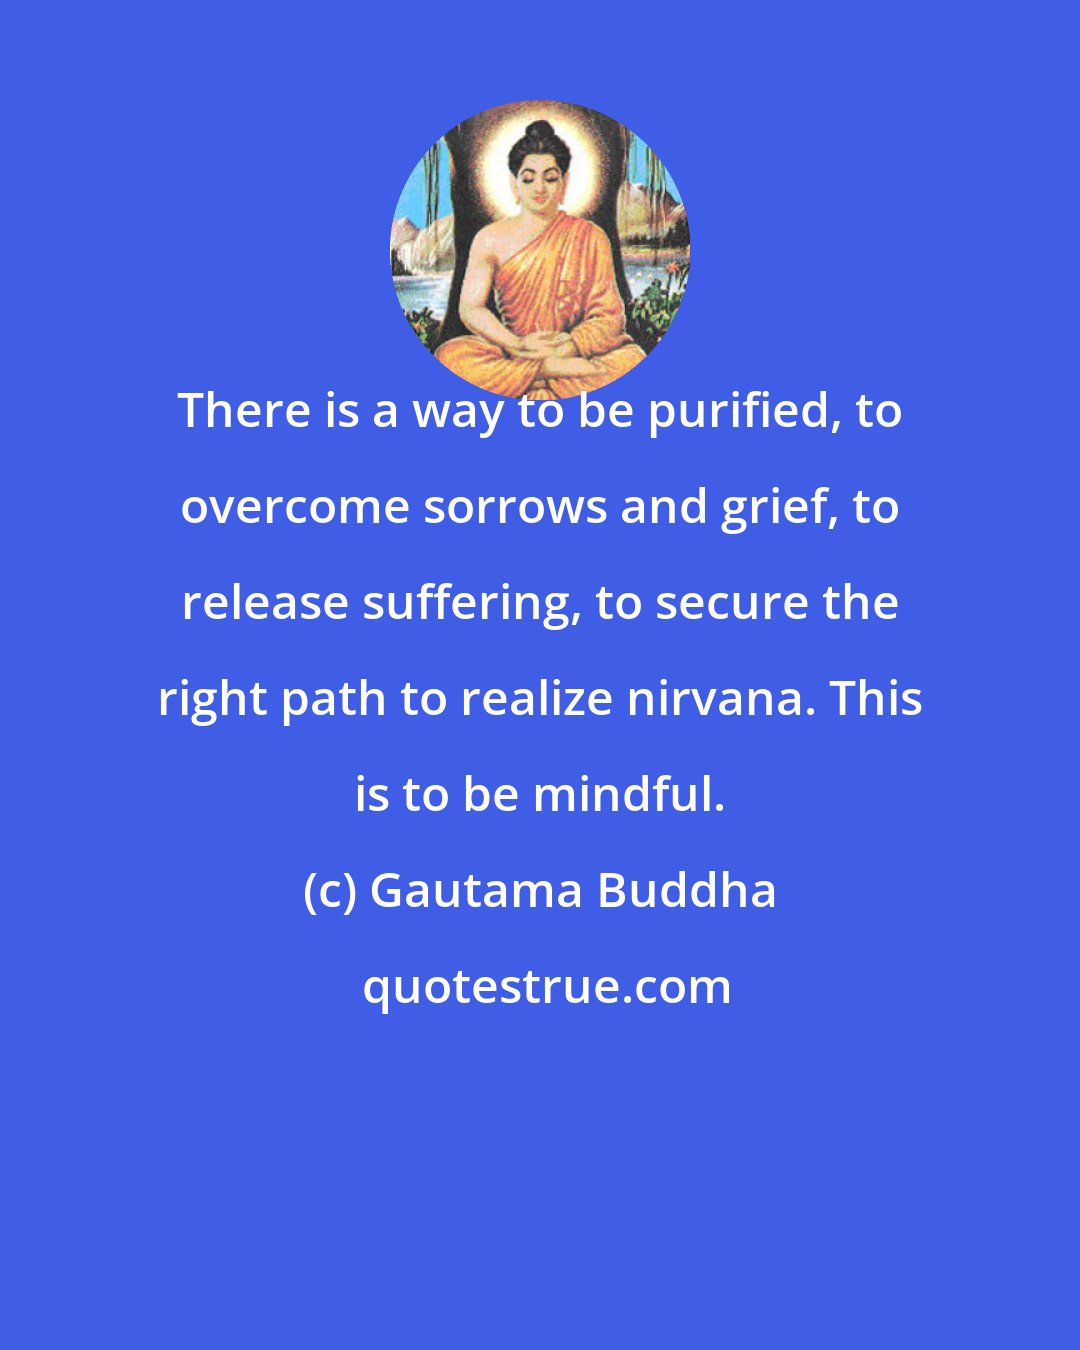 Gautama Buddha: There is a way to be purified, to overcome sorrows and grief, to release suffering, to secure the right path to realize nirvana. This is to be mindful.